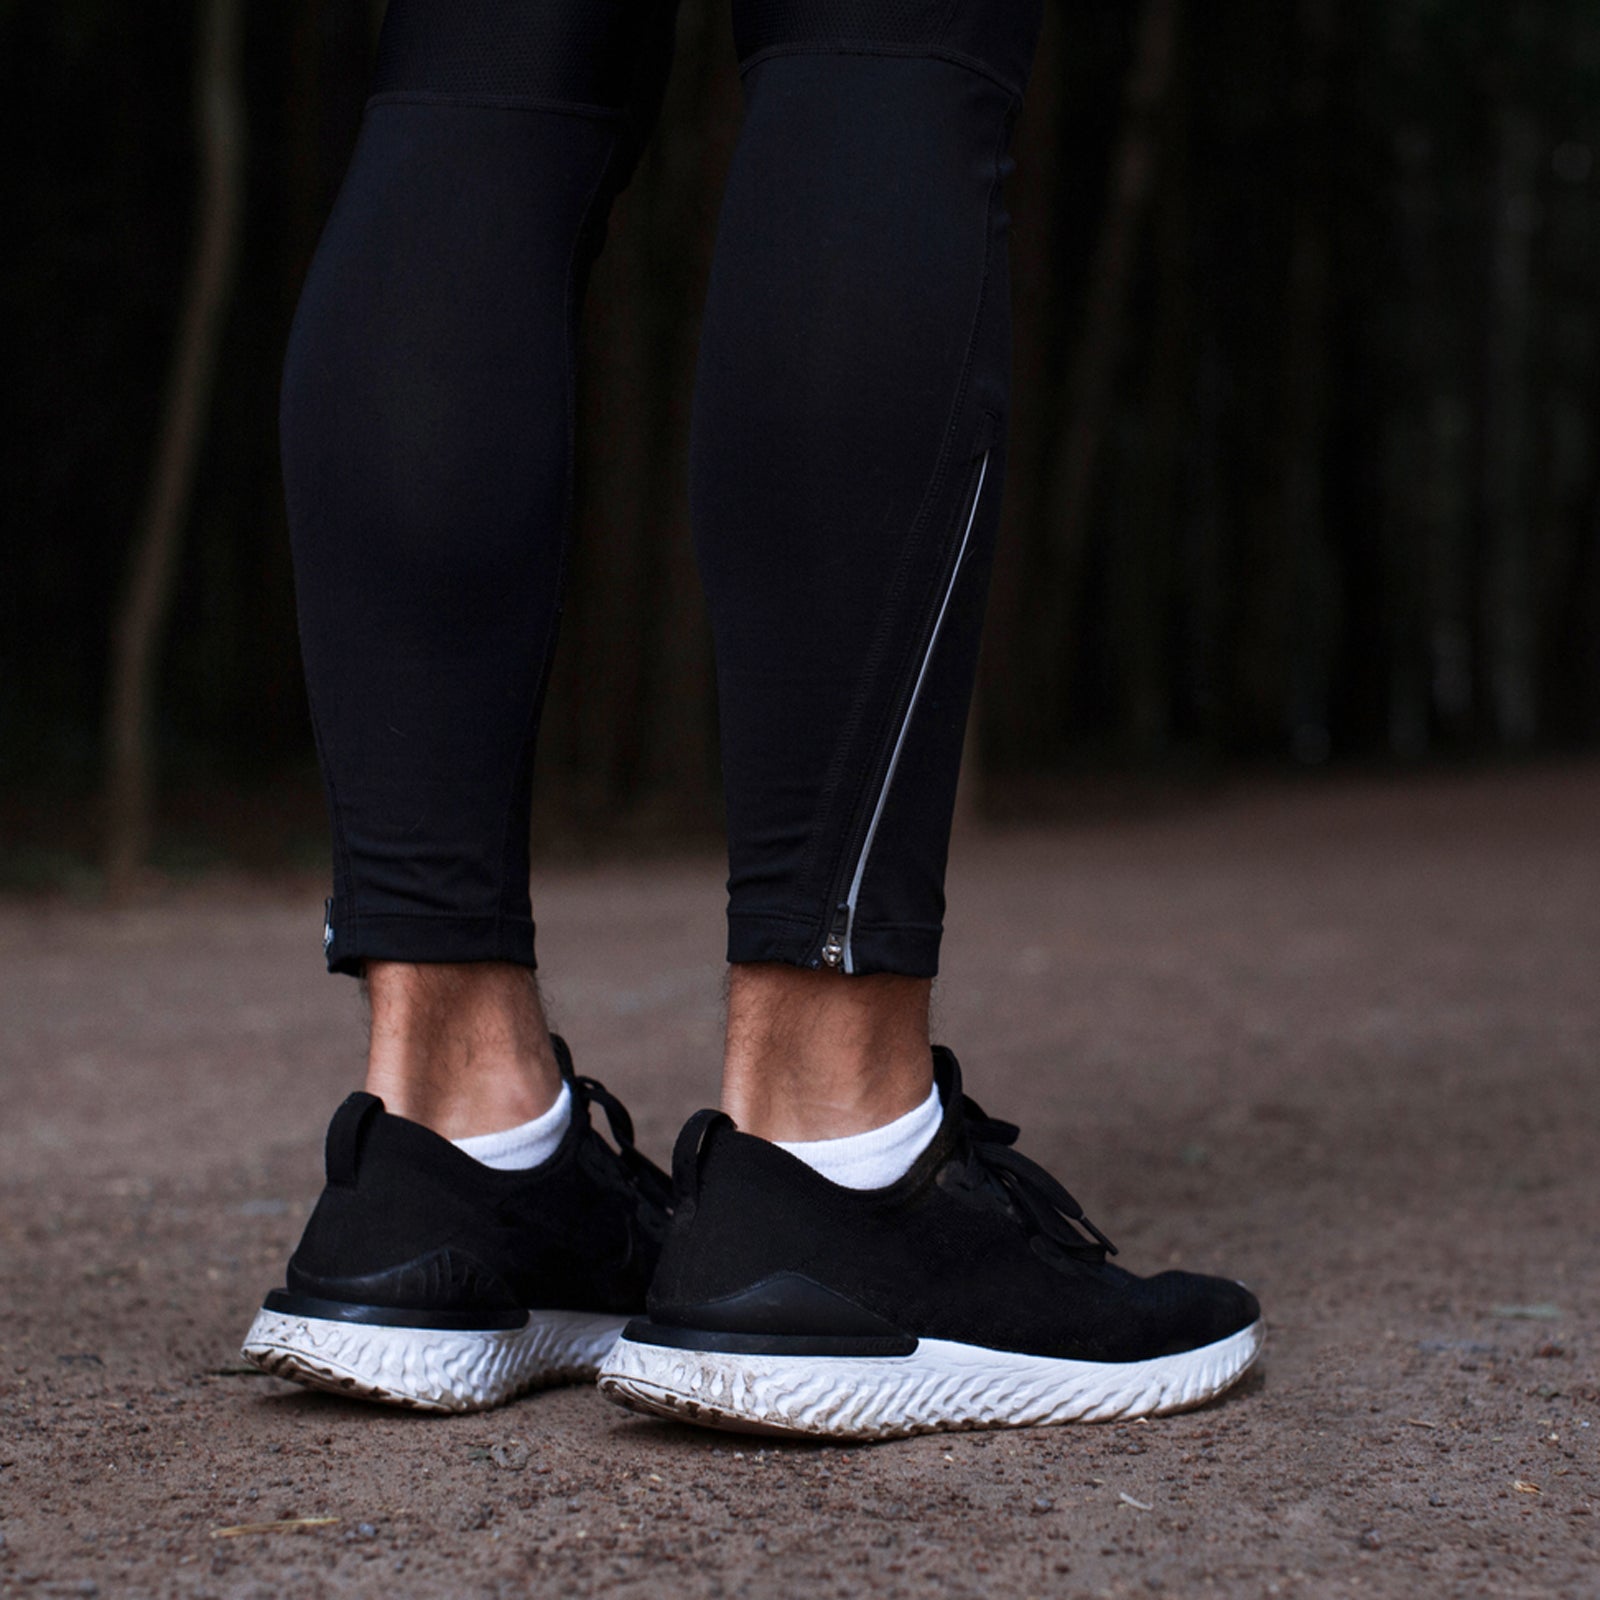 How to Choose a Running Tight